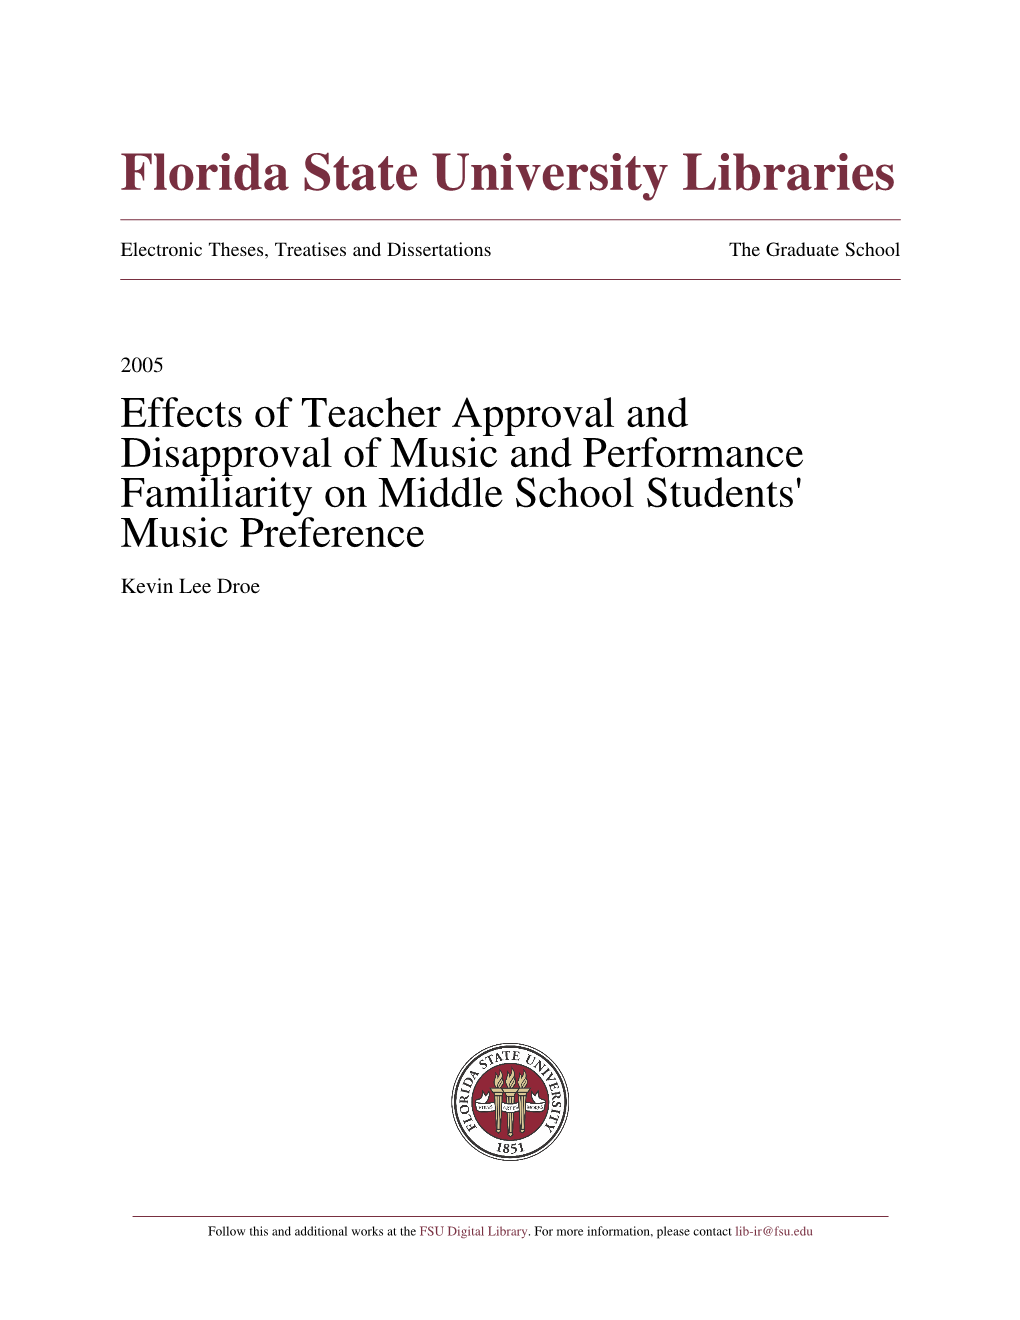 Effects of Teacher Approval and Disapproval of Music and Performance Familiarity on Middle School Students' Music Preference Kevin Lee Droe